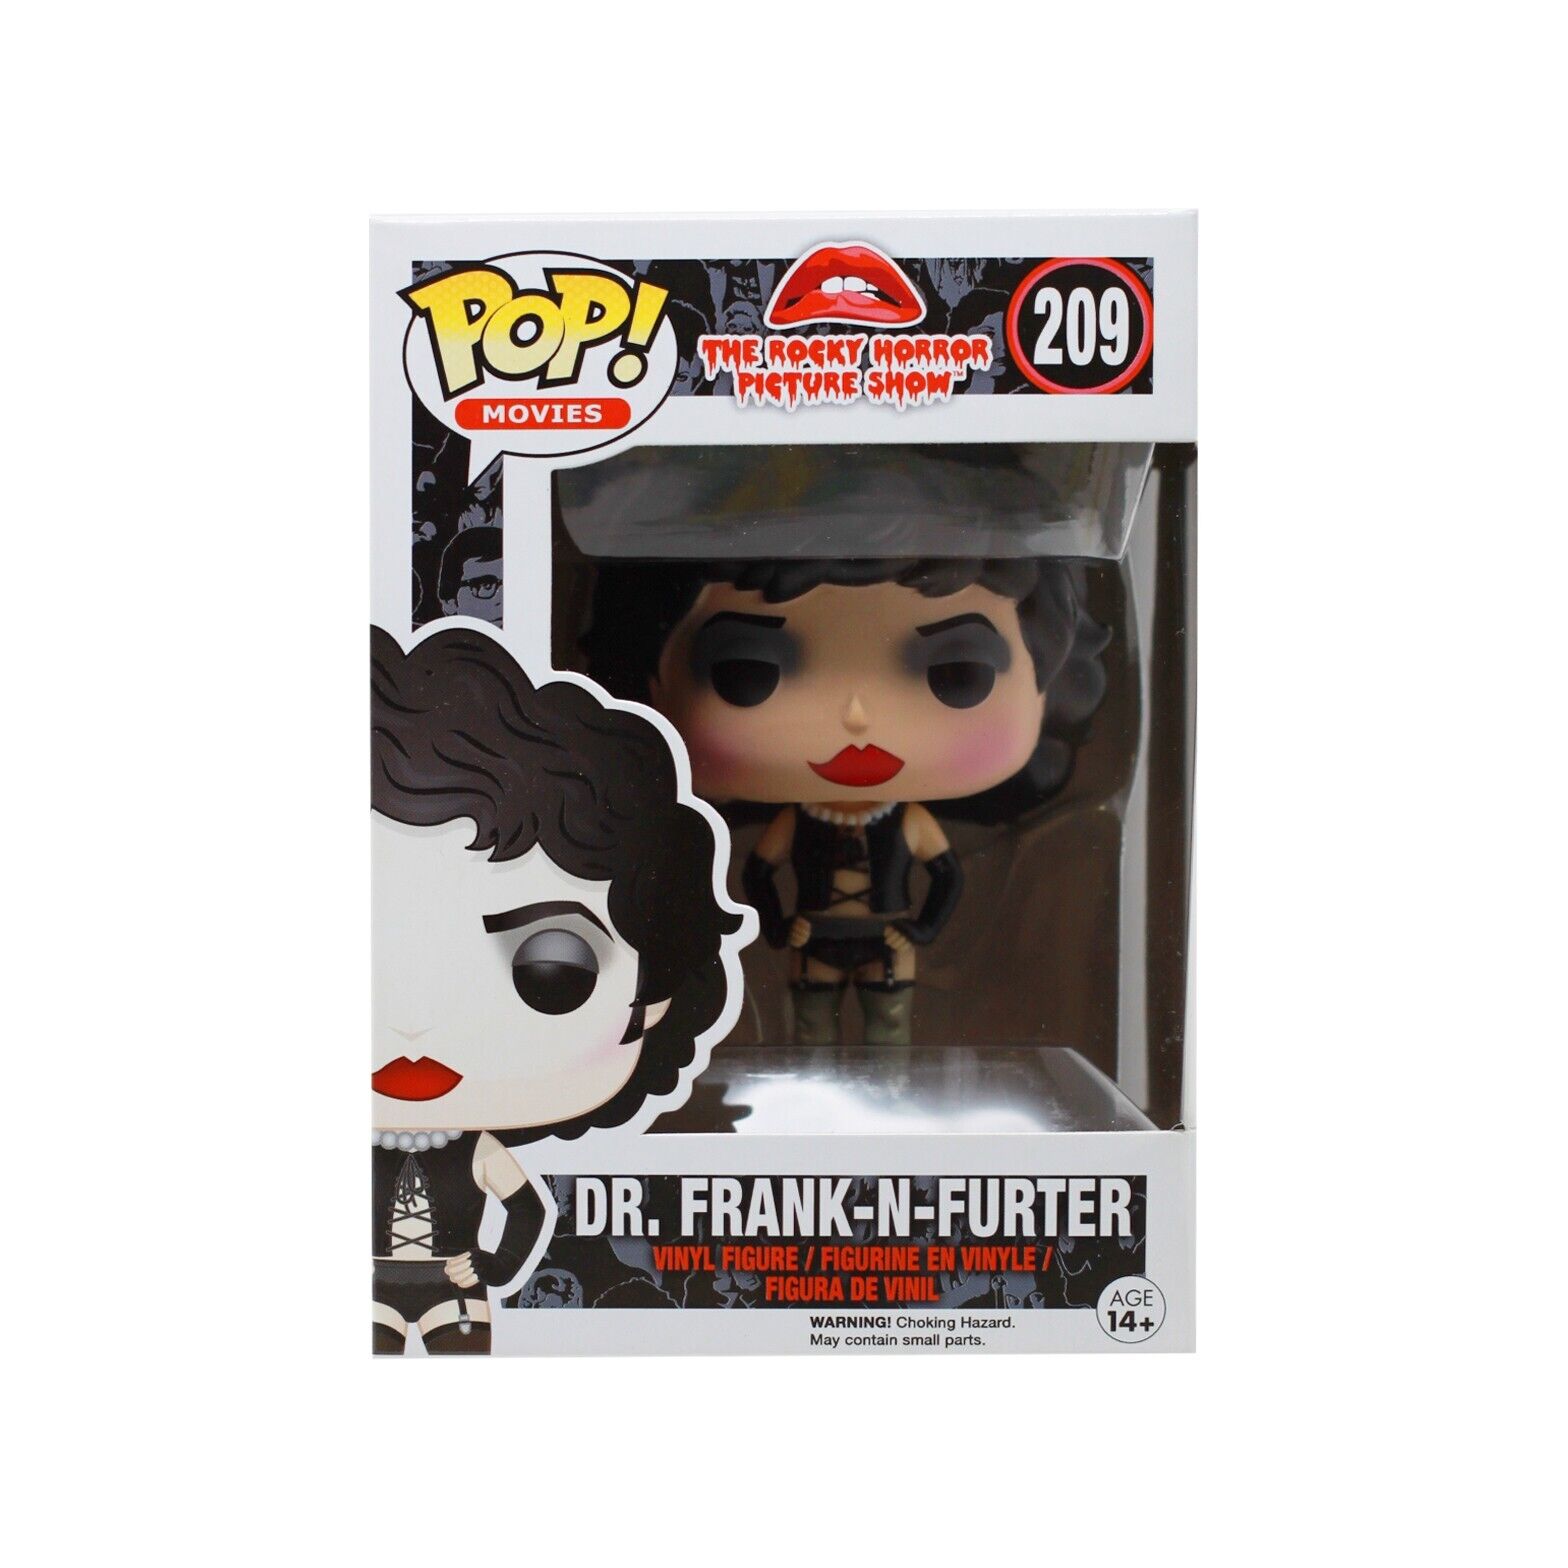 Funko Pop The Rocky Horror Picture Show Dr. Frank-N-Furter #209 - Vaulted NIB